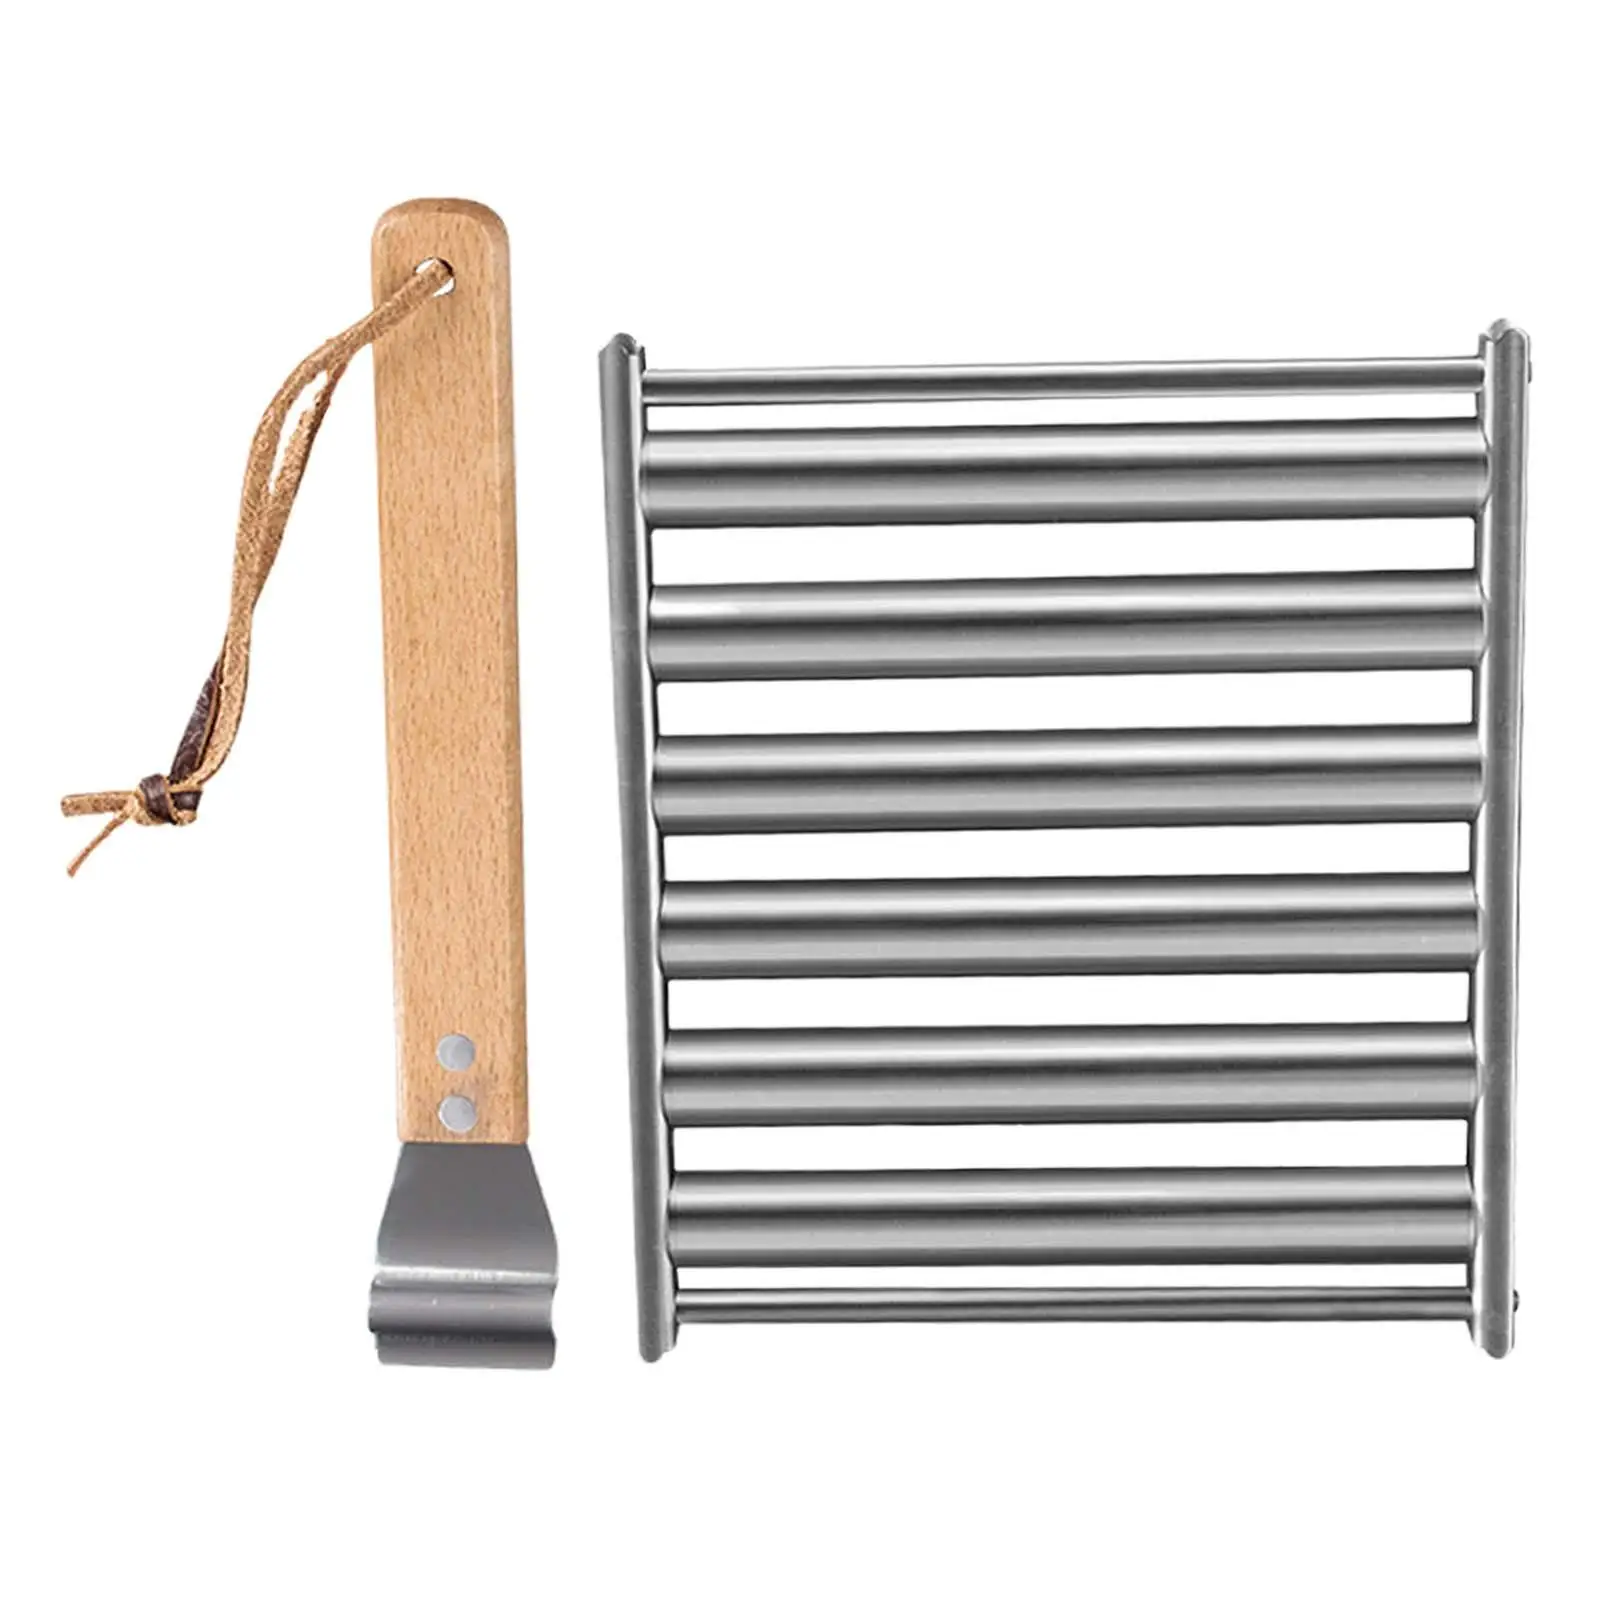 Sausage Roller Rack with Long Wooden Handle Sausage Grill Cooker Hot Dog Roller Hot Dog Grill Roller for Sausages Egg Rolls